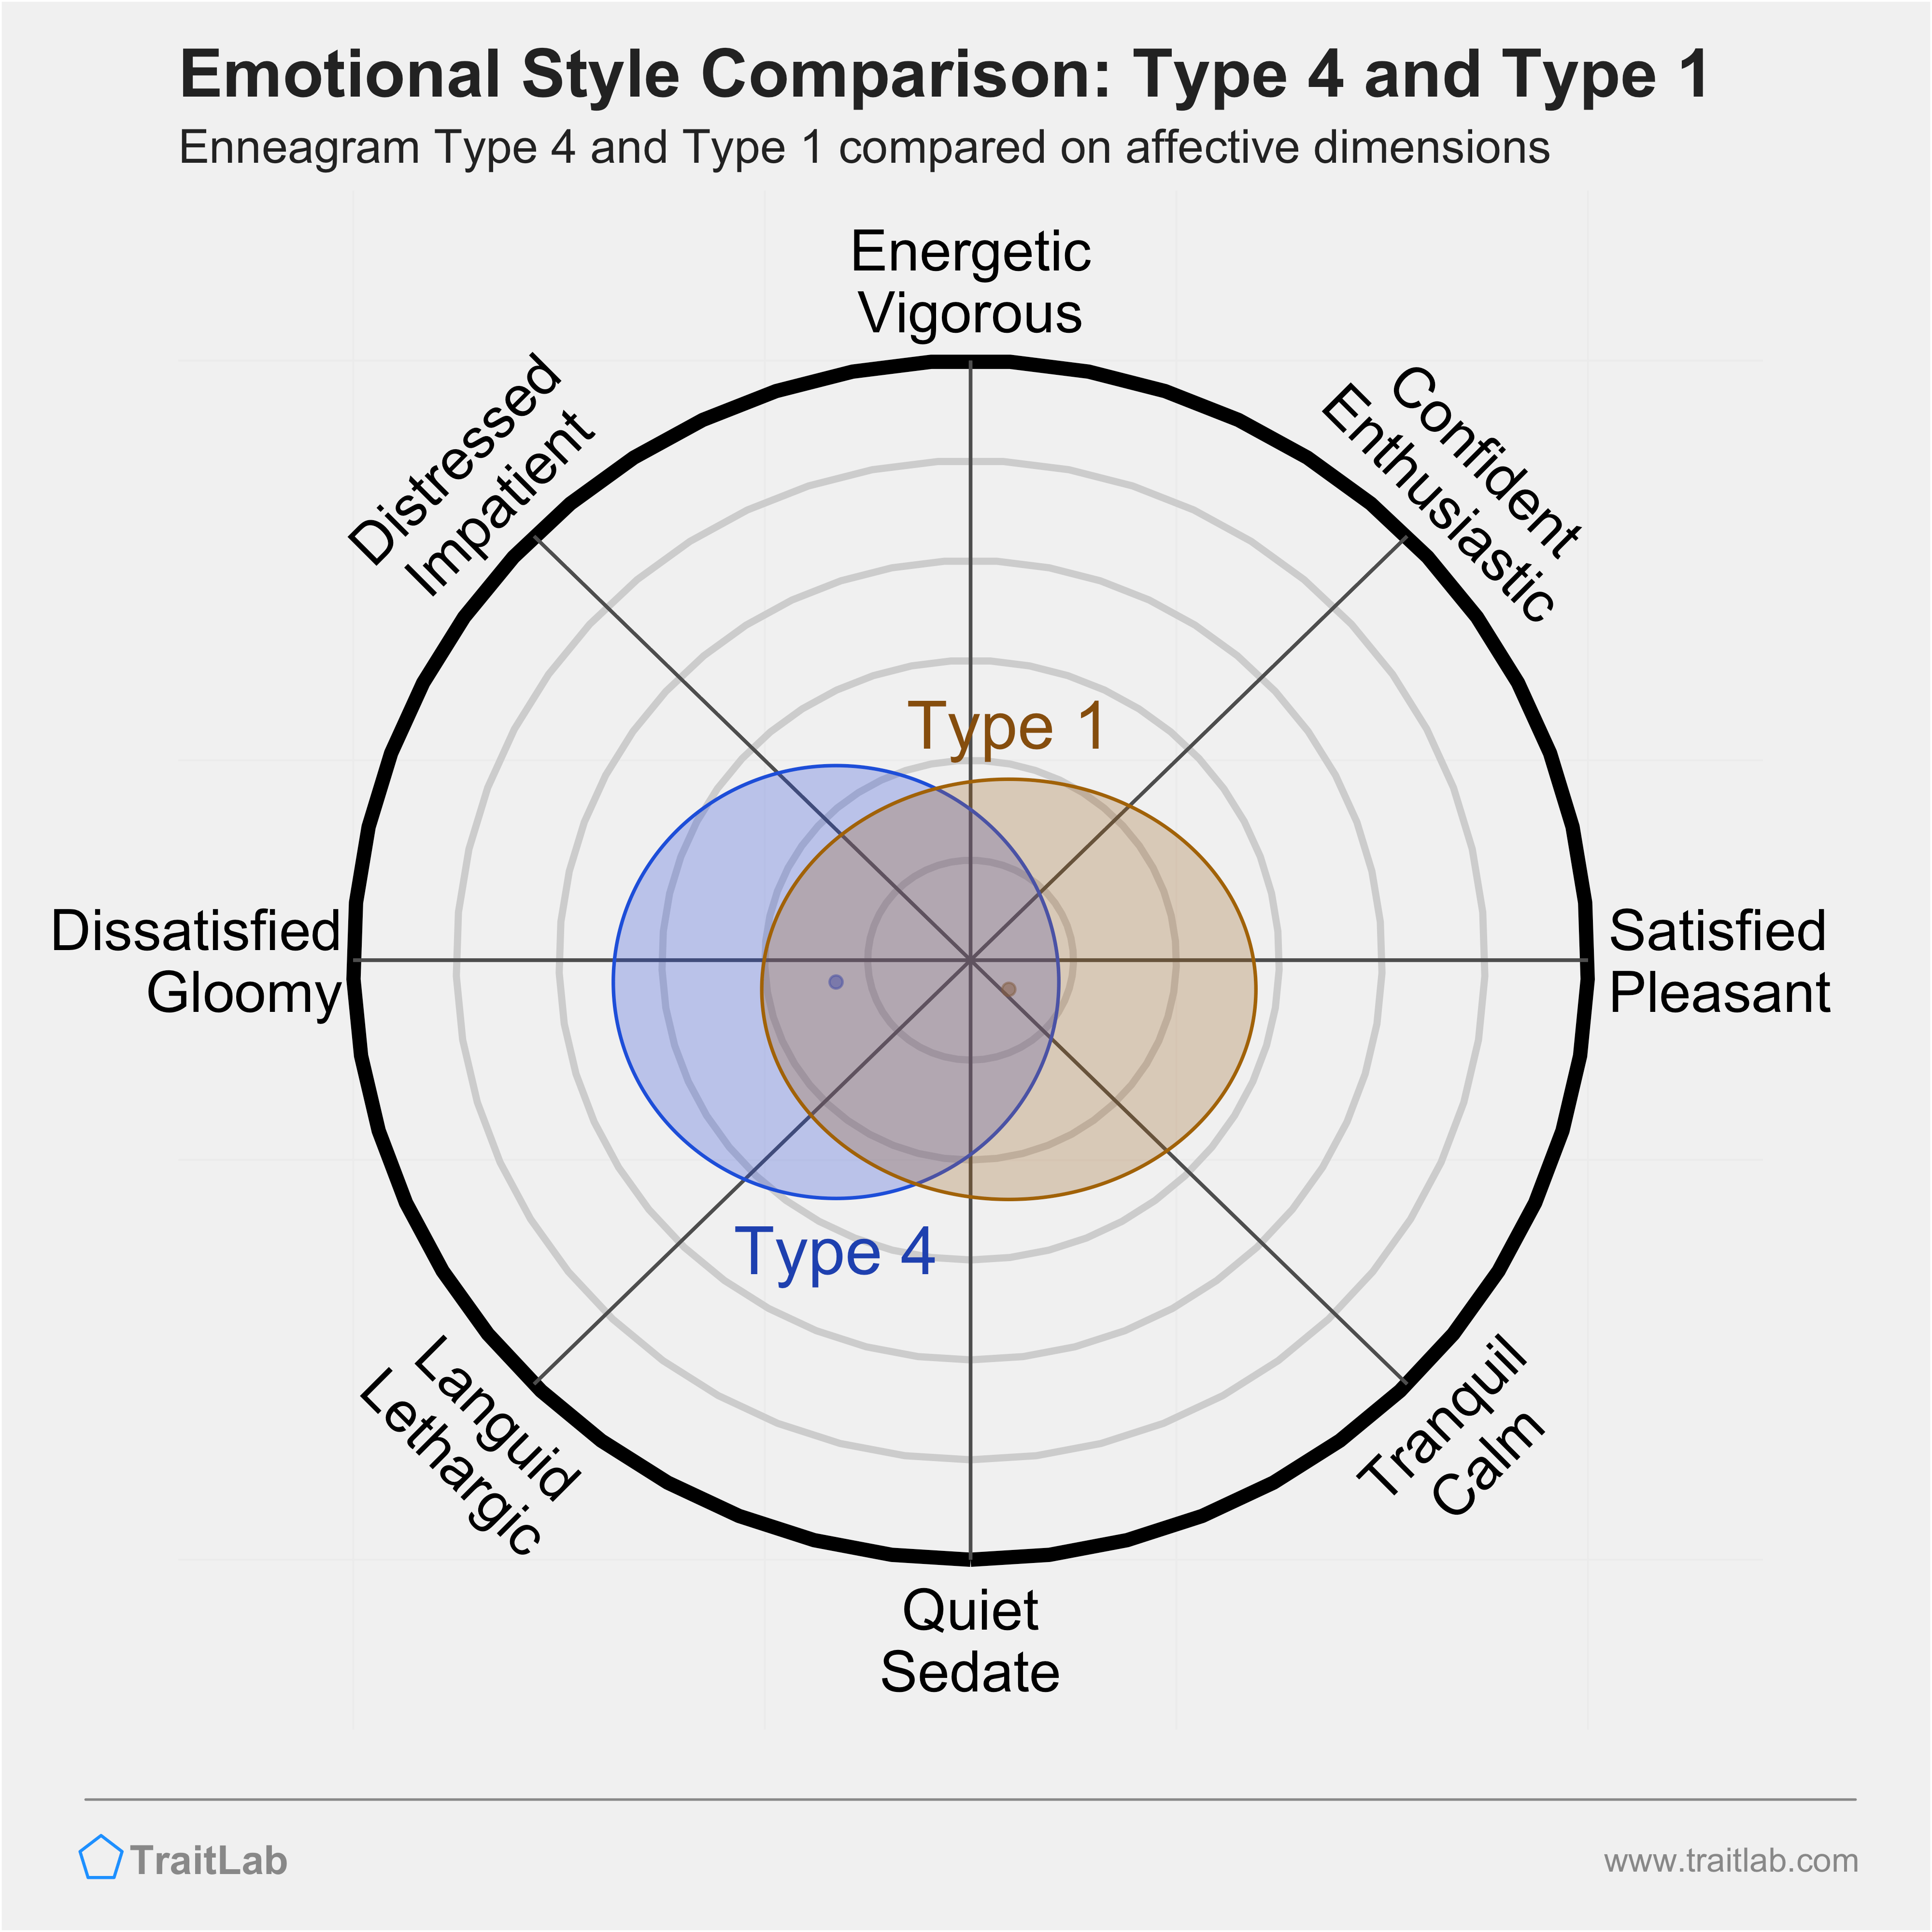 Type 4 and Type 1 comparison across emotional (affective) dimensions